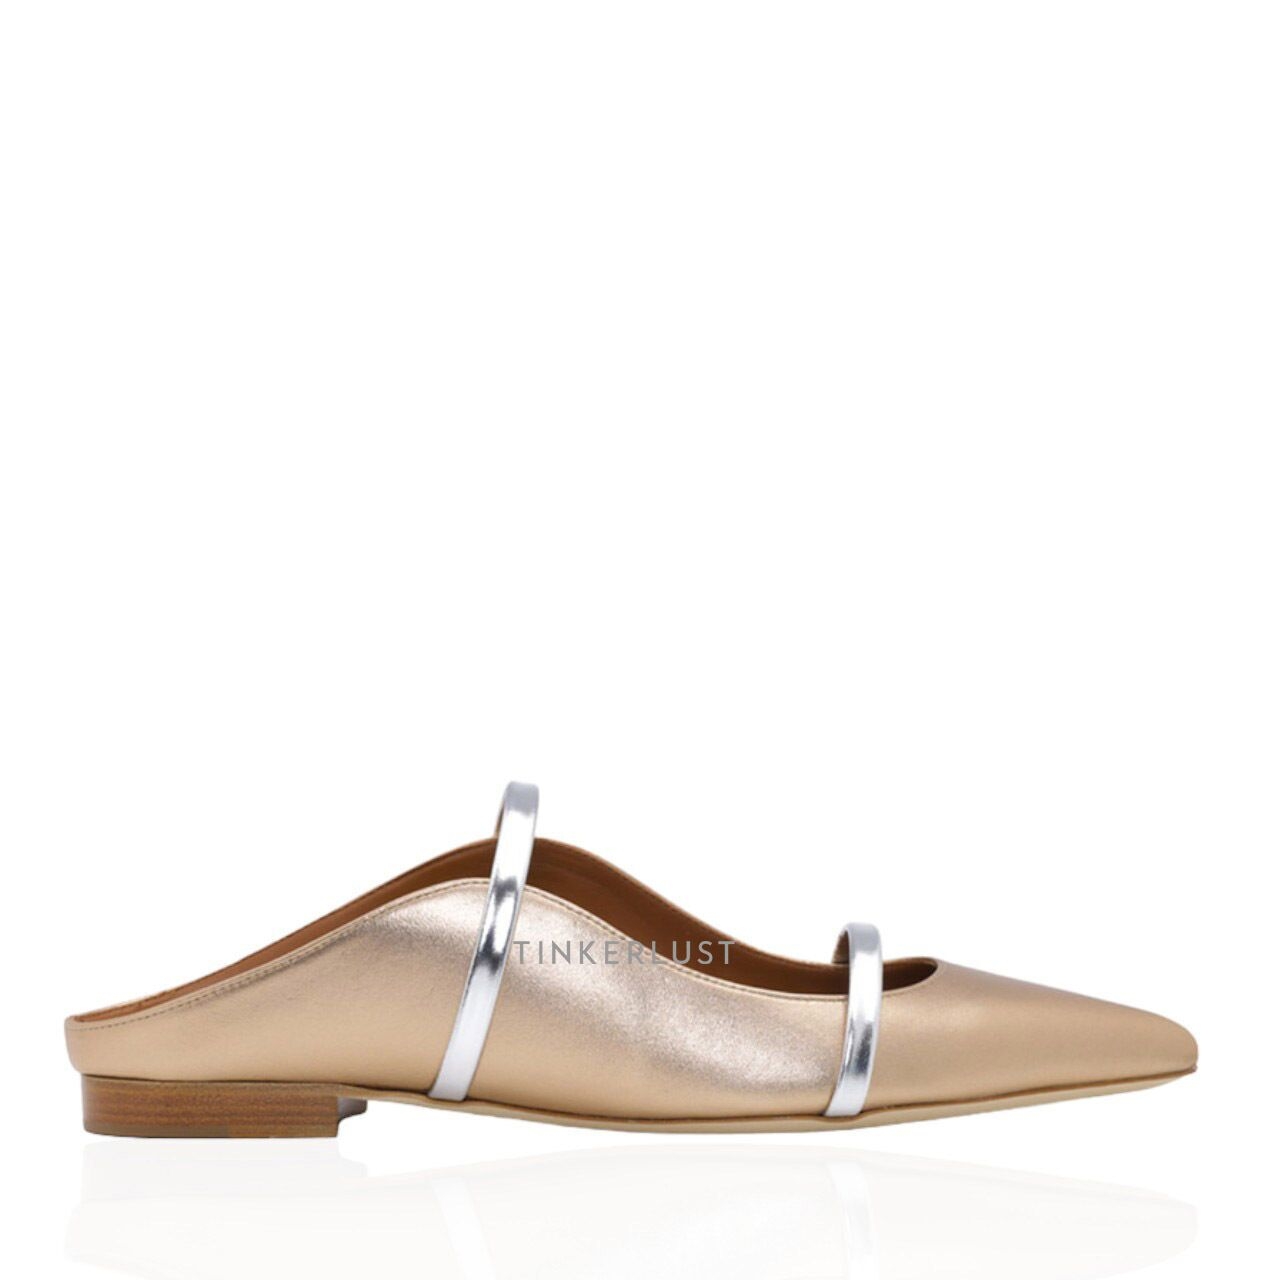 Malone Souliers Maureen Mules Gold/Silver Sandals